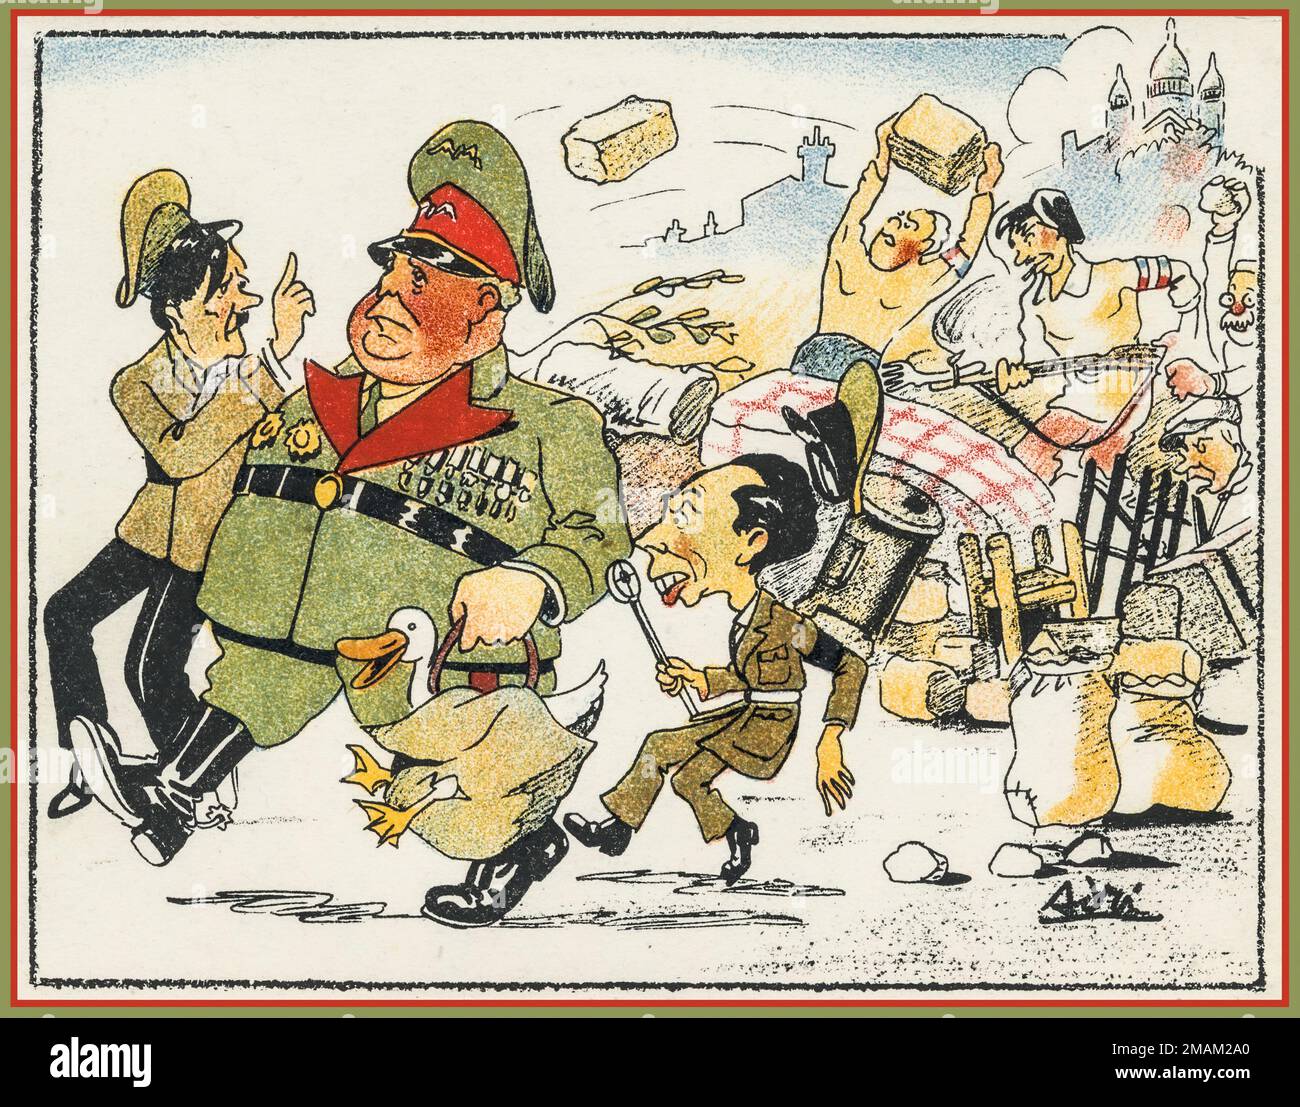 WW2 Anti-Nazi Cartoon caricature featuring a fat Hermann Goering, with Adolf Hitler remonstrating and Joseph Goebbels with his propaganda microphone in France, experiencing stiff resistance at the French Paris border. World War II Stock Photo